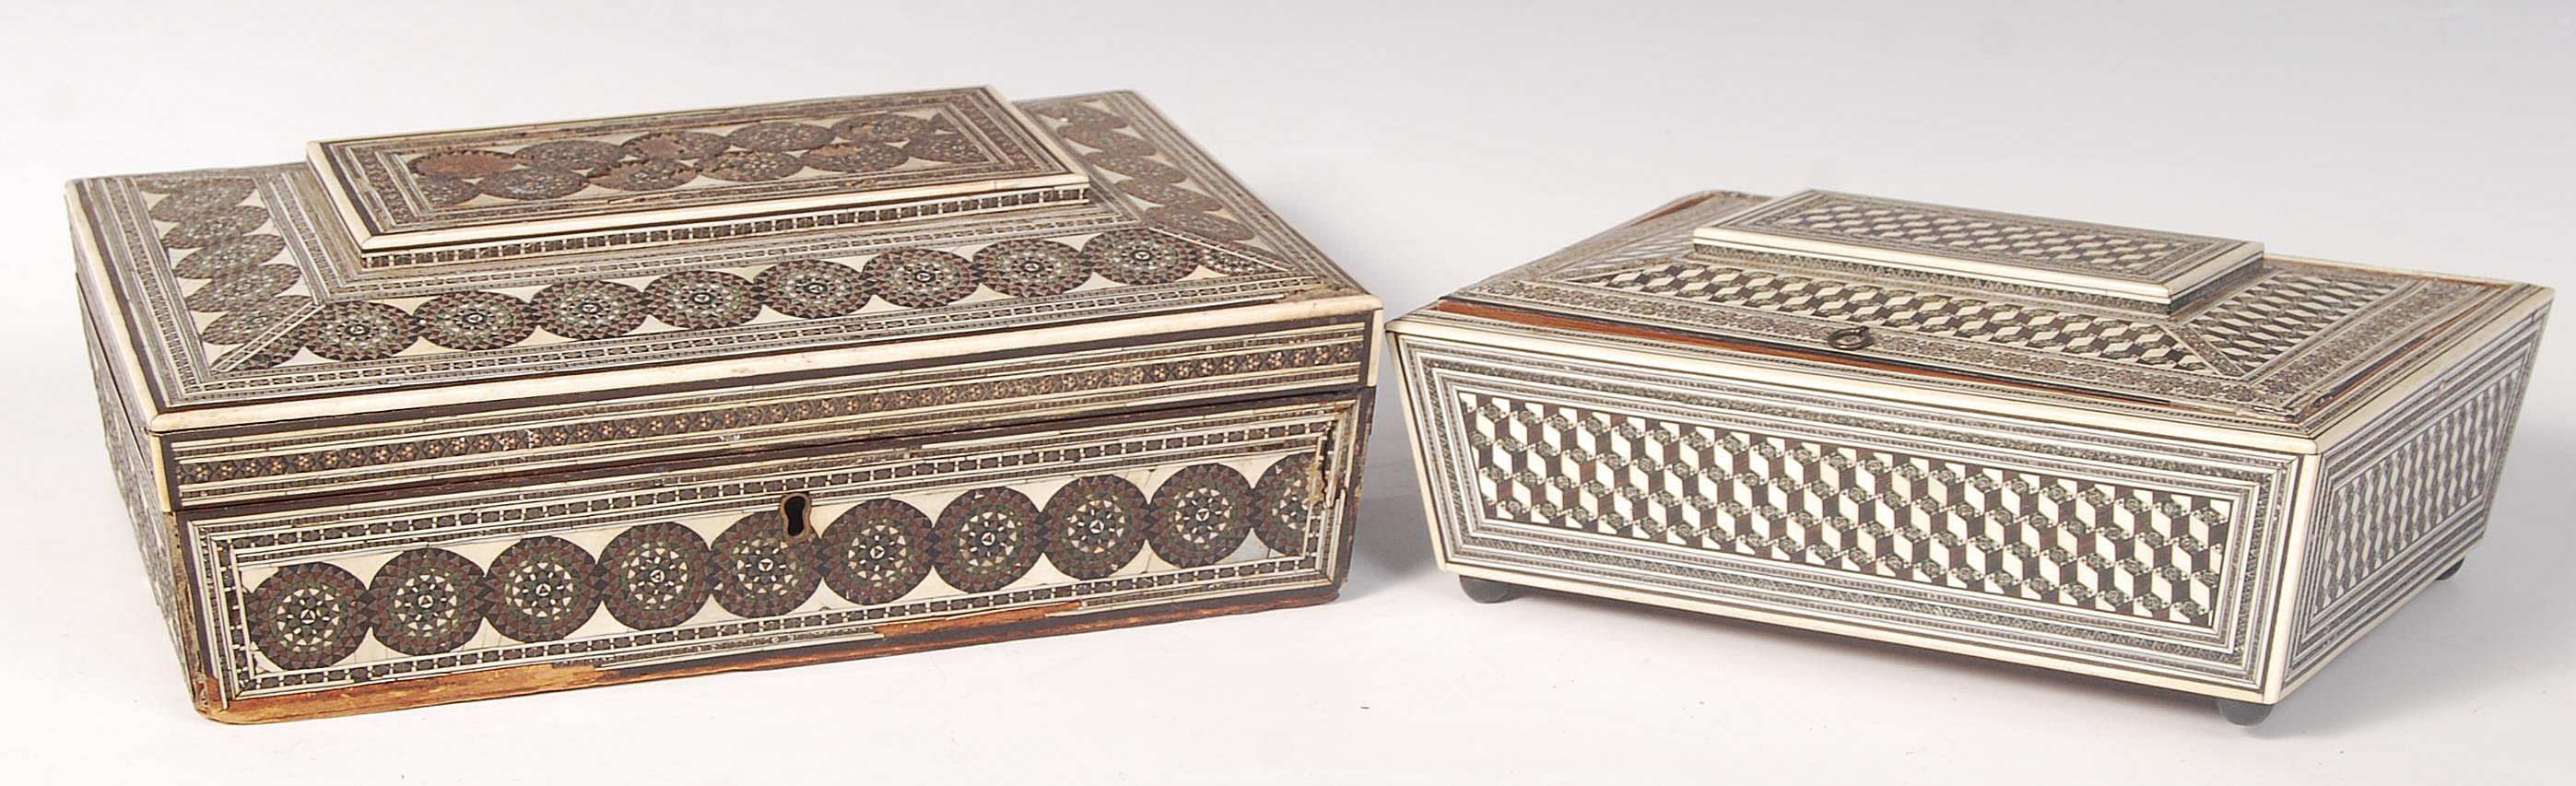 TWO 19TH CENTURY ANGLO INDIAN VIZAGAPATAM BOXES